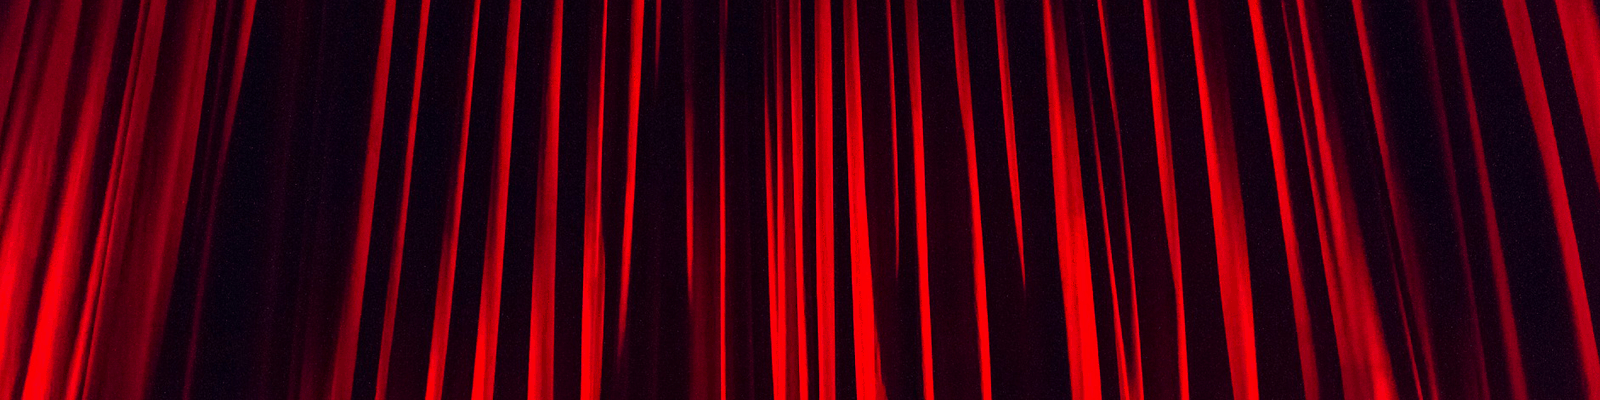 Red curtain backdrop